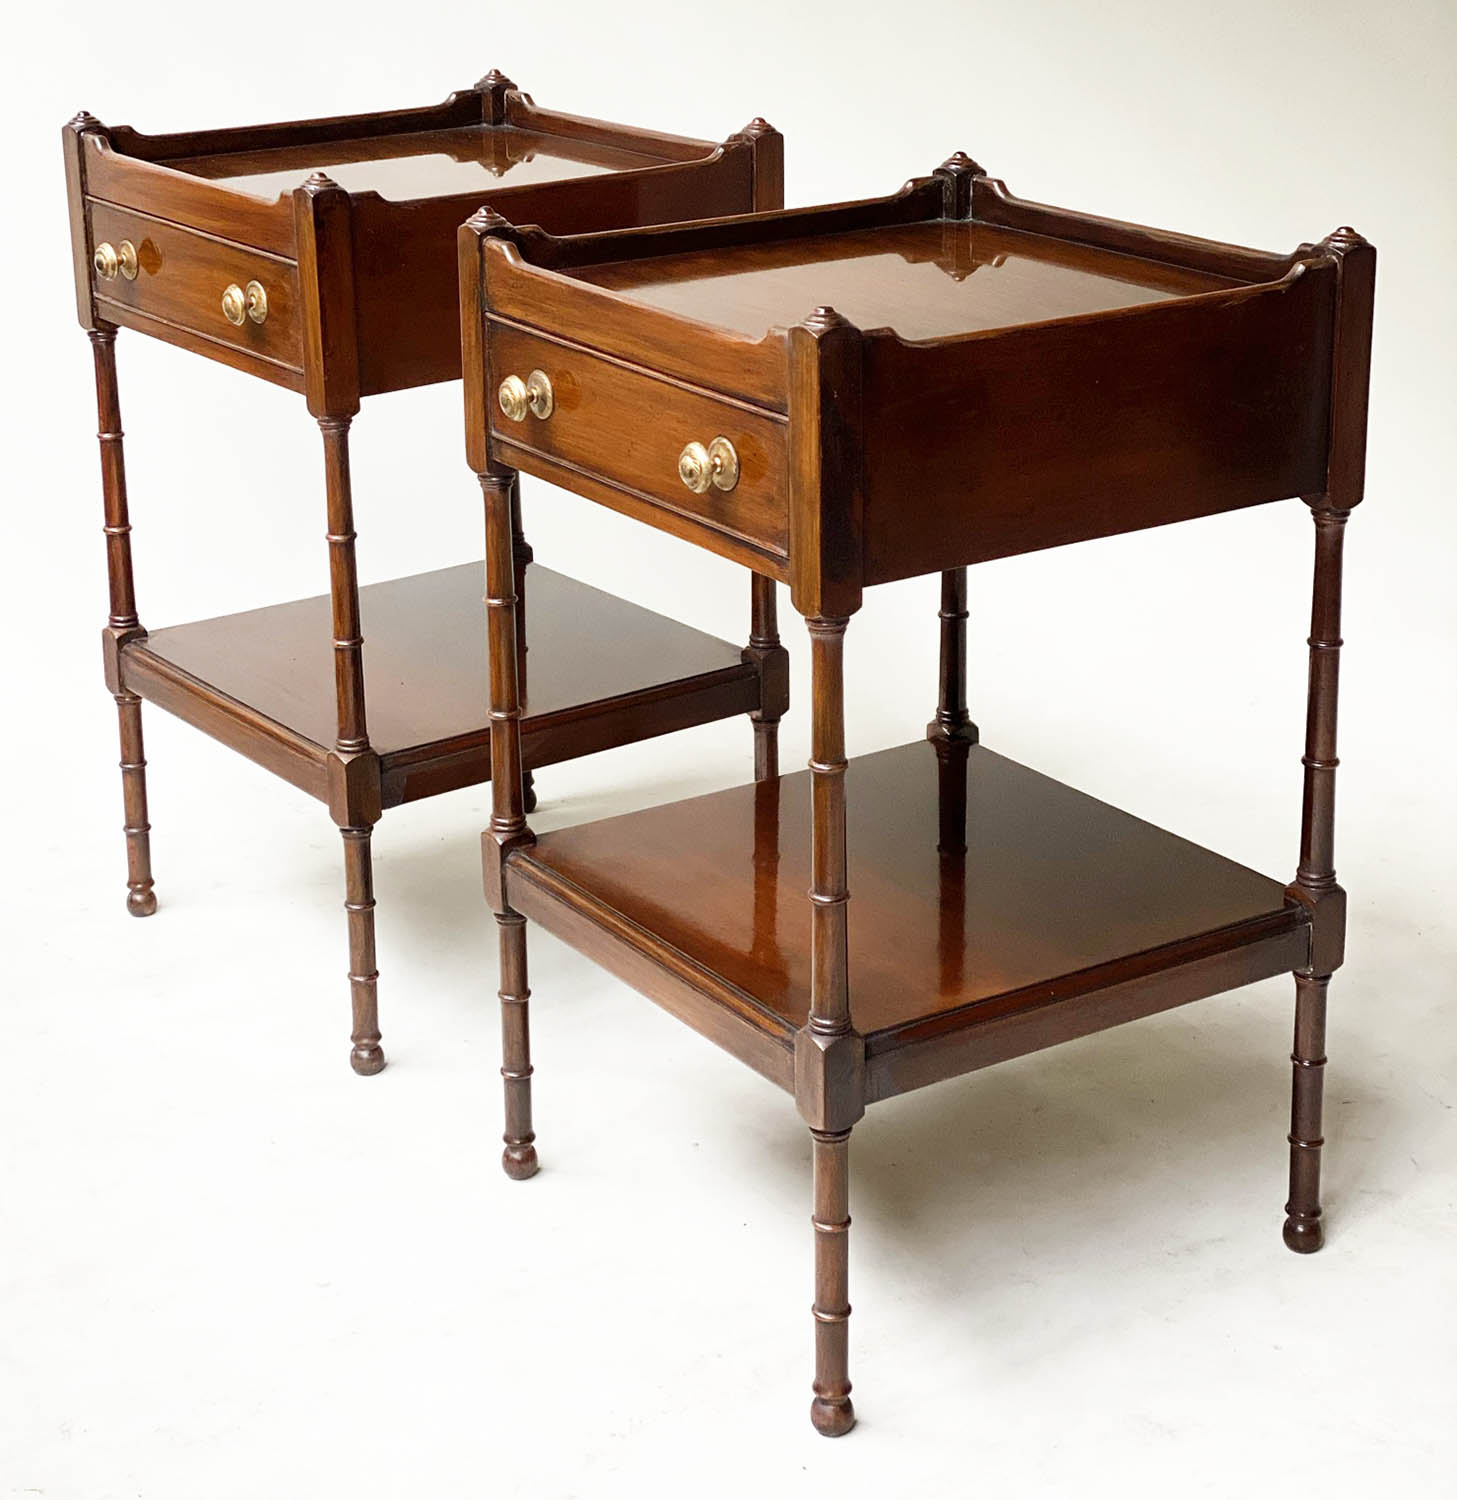 LAMP TABLES, a pair, George III design mahogany, each galleried with frieze drawer and under tier, - Image 7 of 8